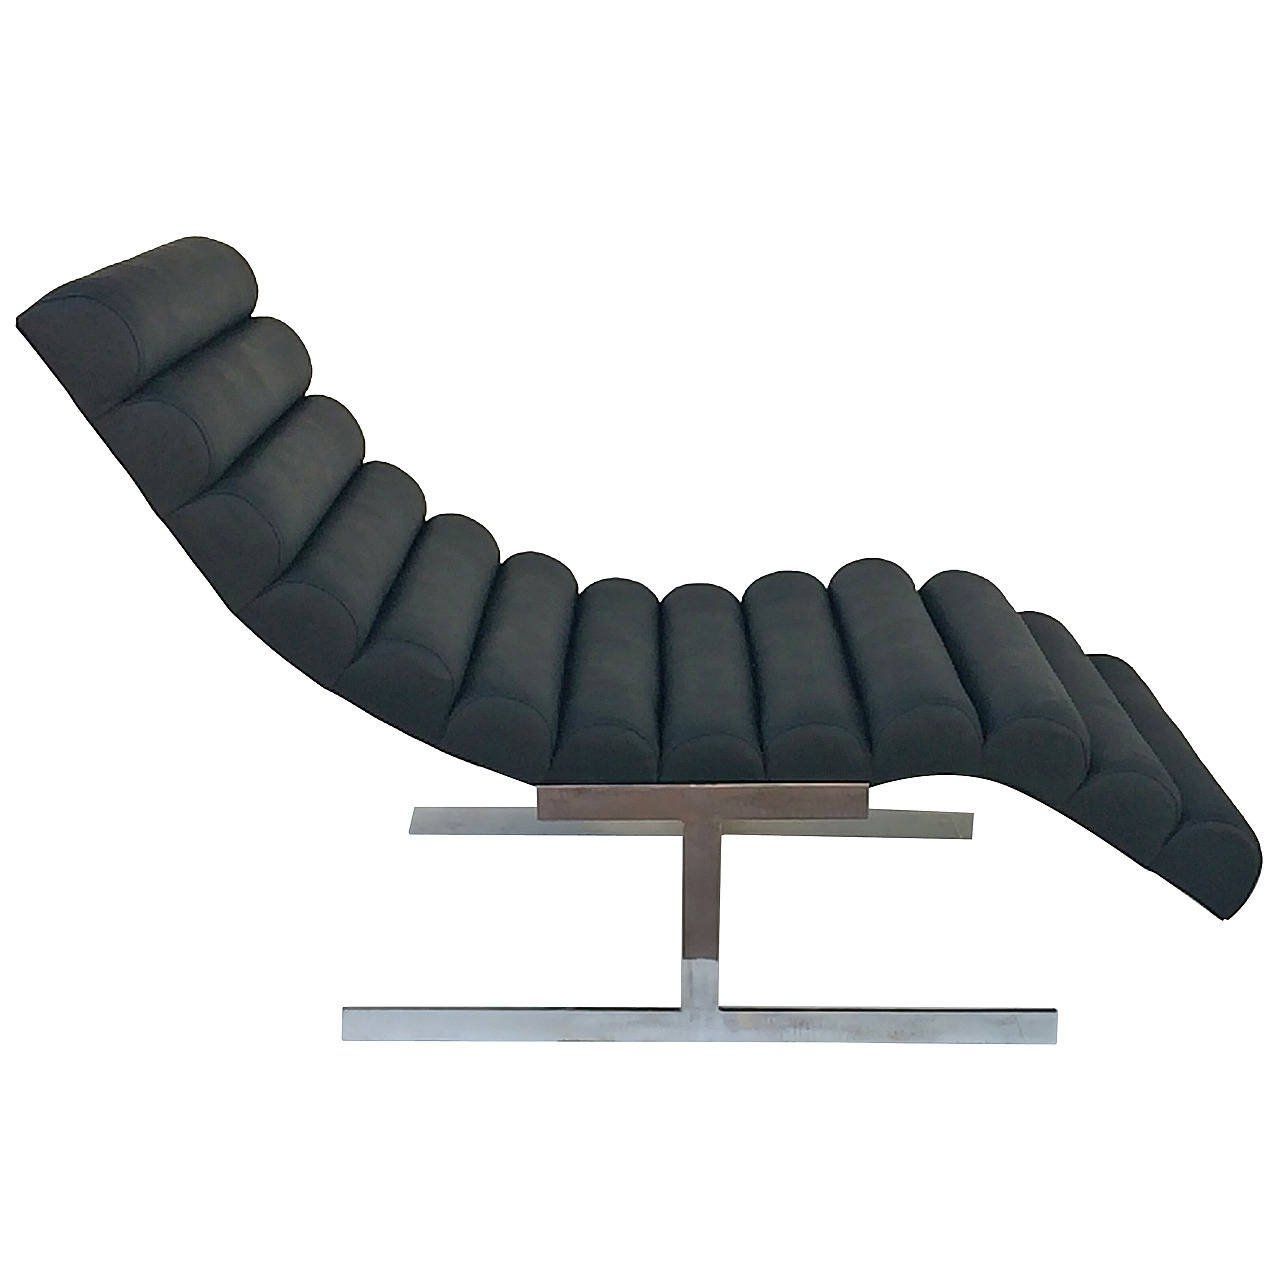 Newest Black Leather Chaise Lounges In Black Channeled Leather Chaise Loungemilo Baughman At 1stdibs (View 7 of 15)